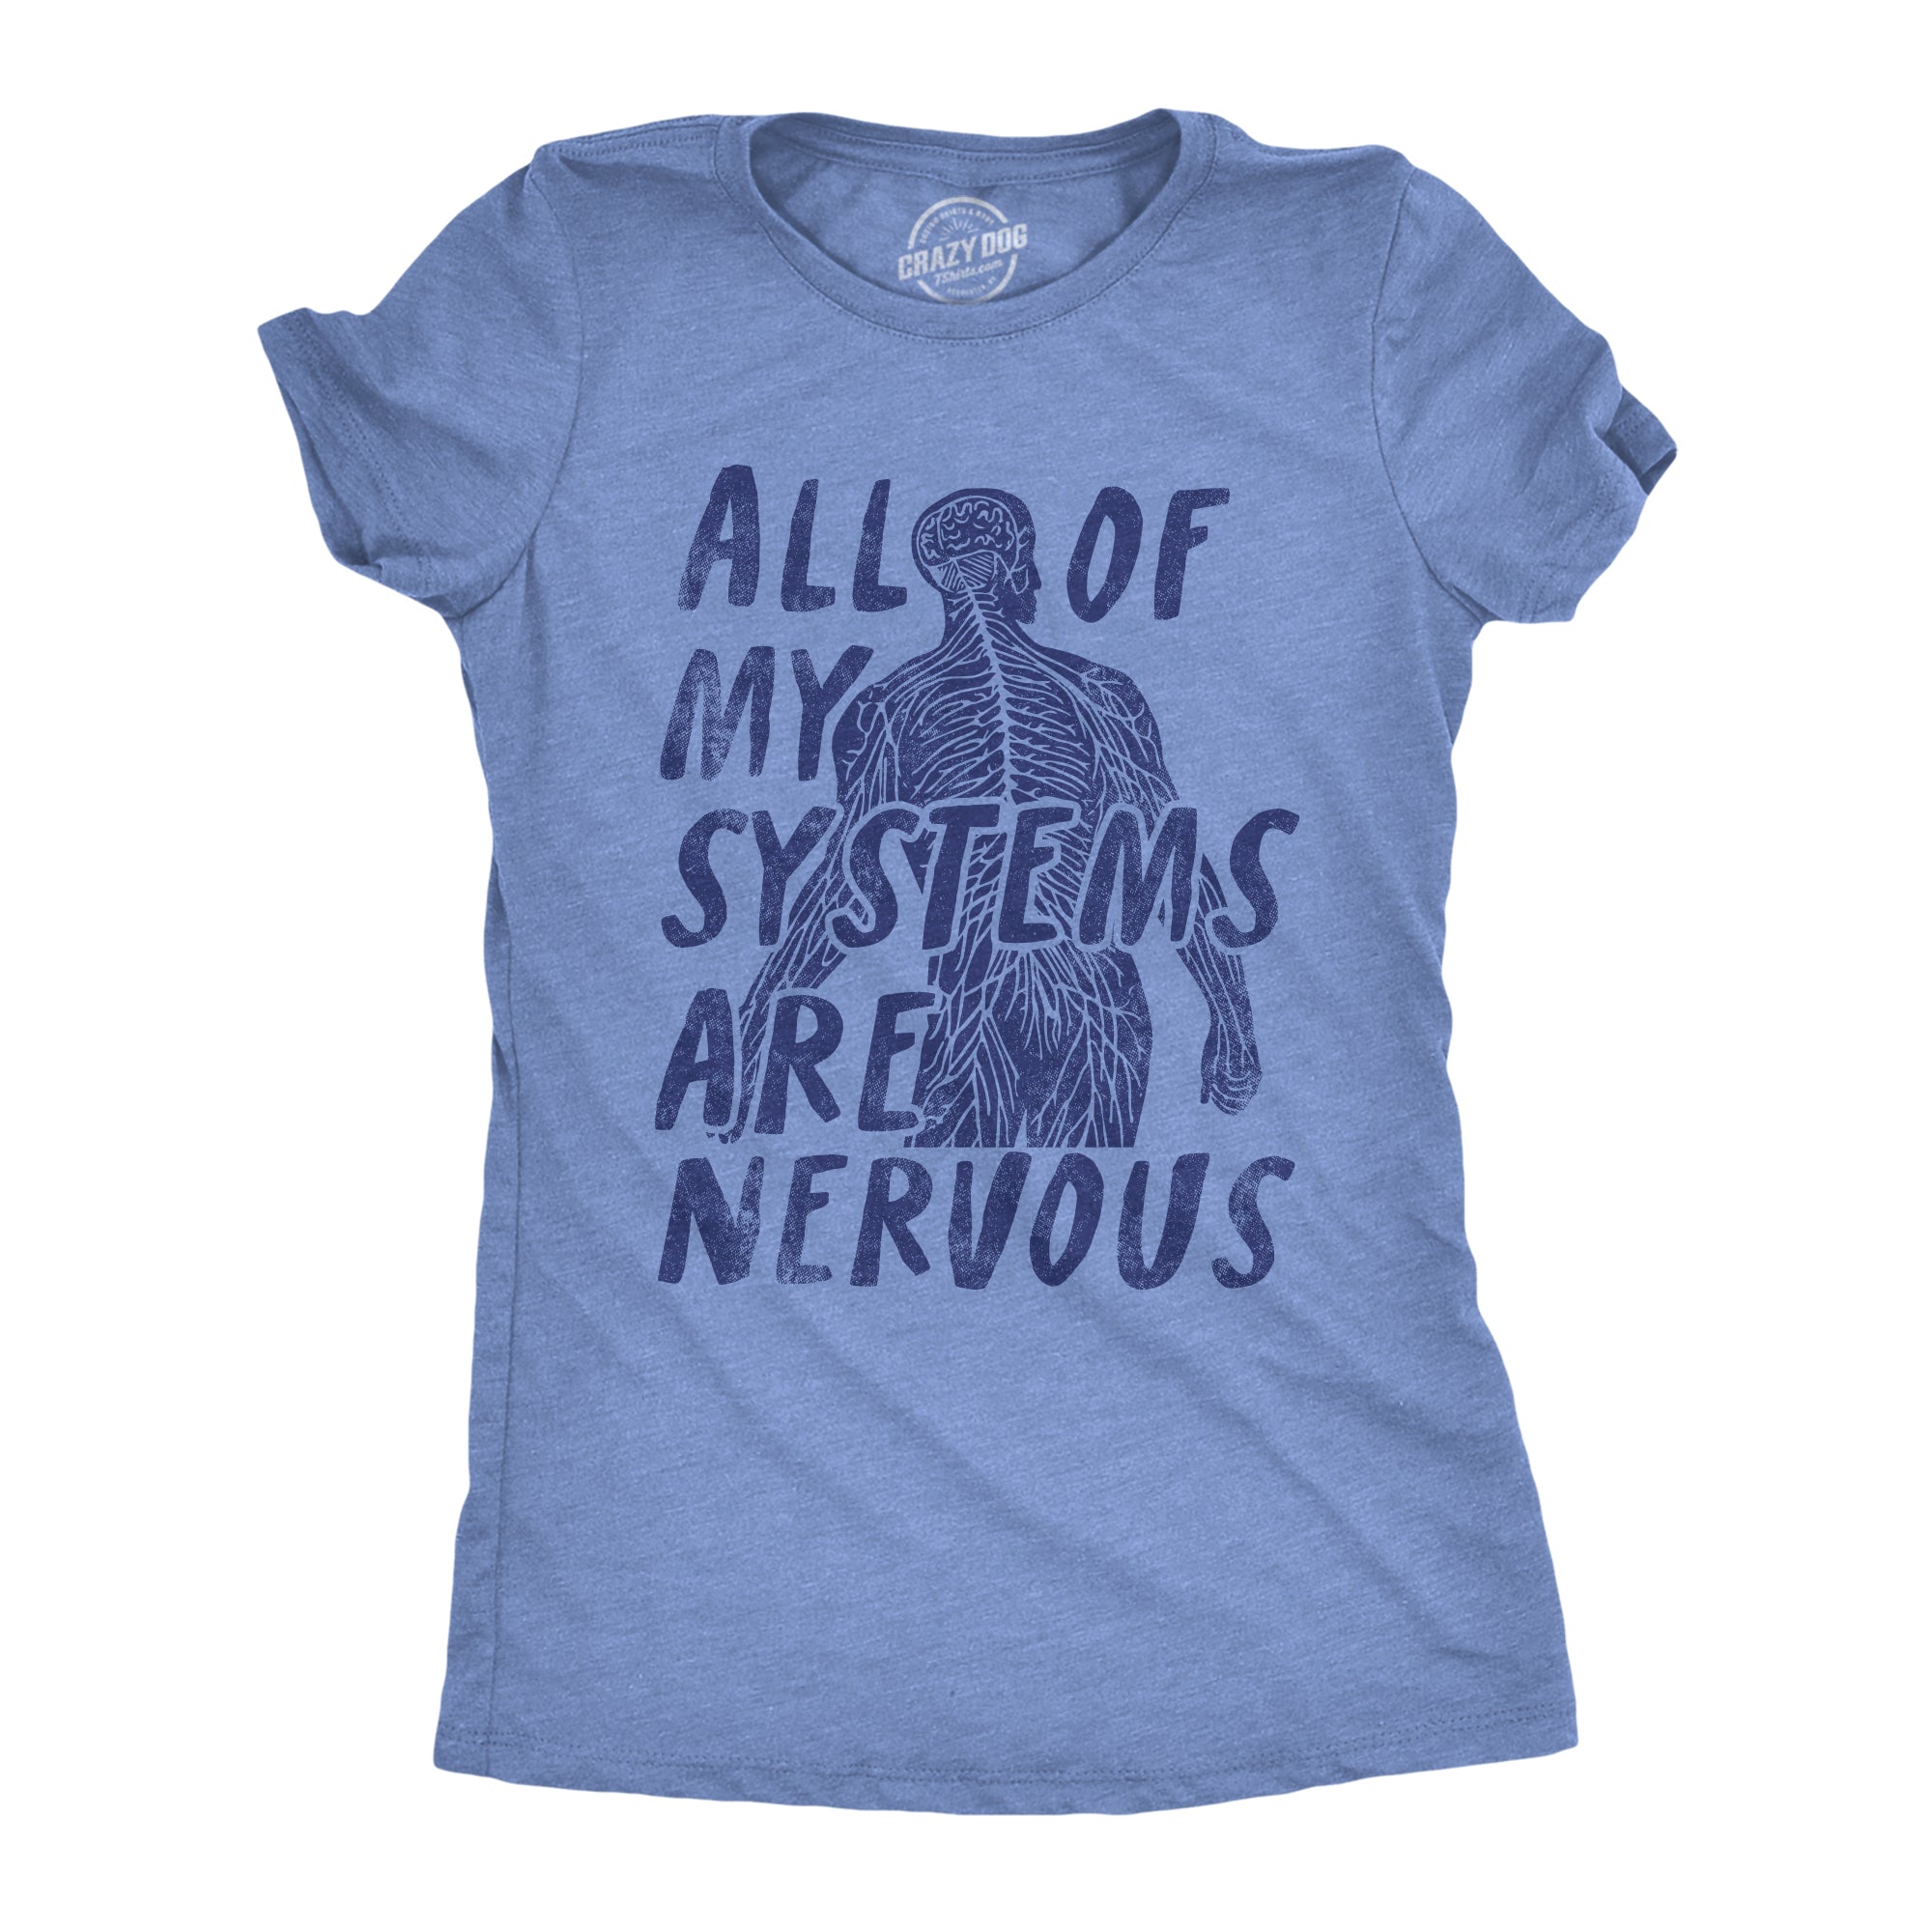 Funny Light Heather Blue - Systems Are Nervous All Of My Systems Are Nervous Womens T Shirt Nerdy Sarcastic Tee